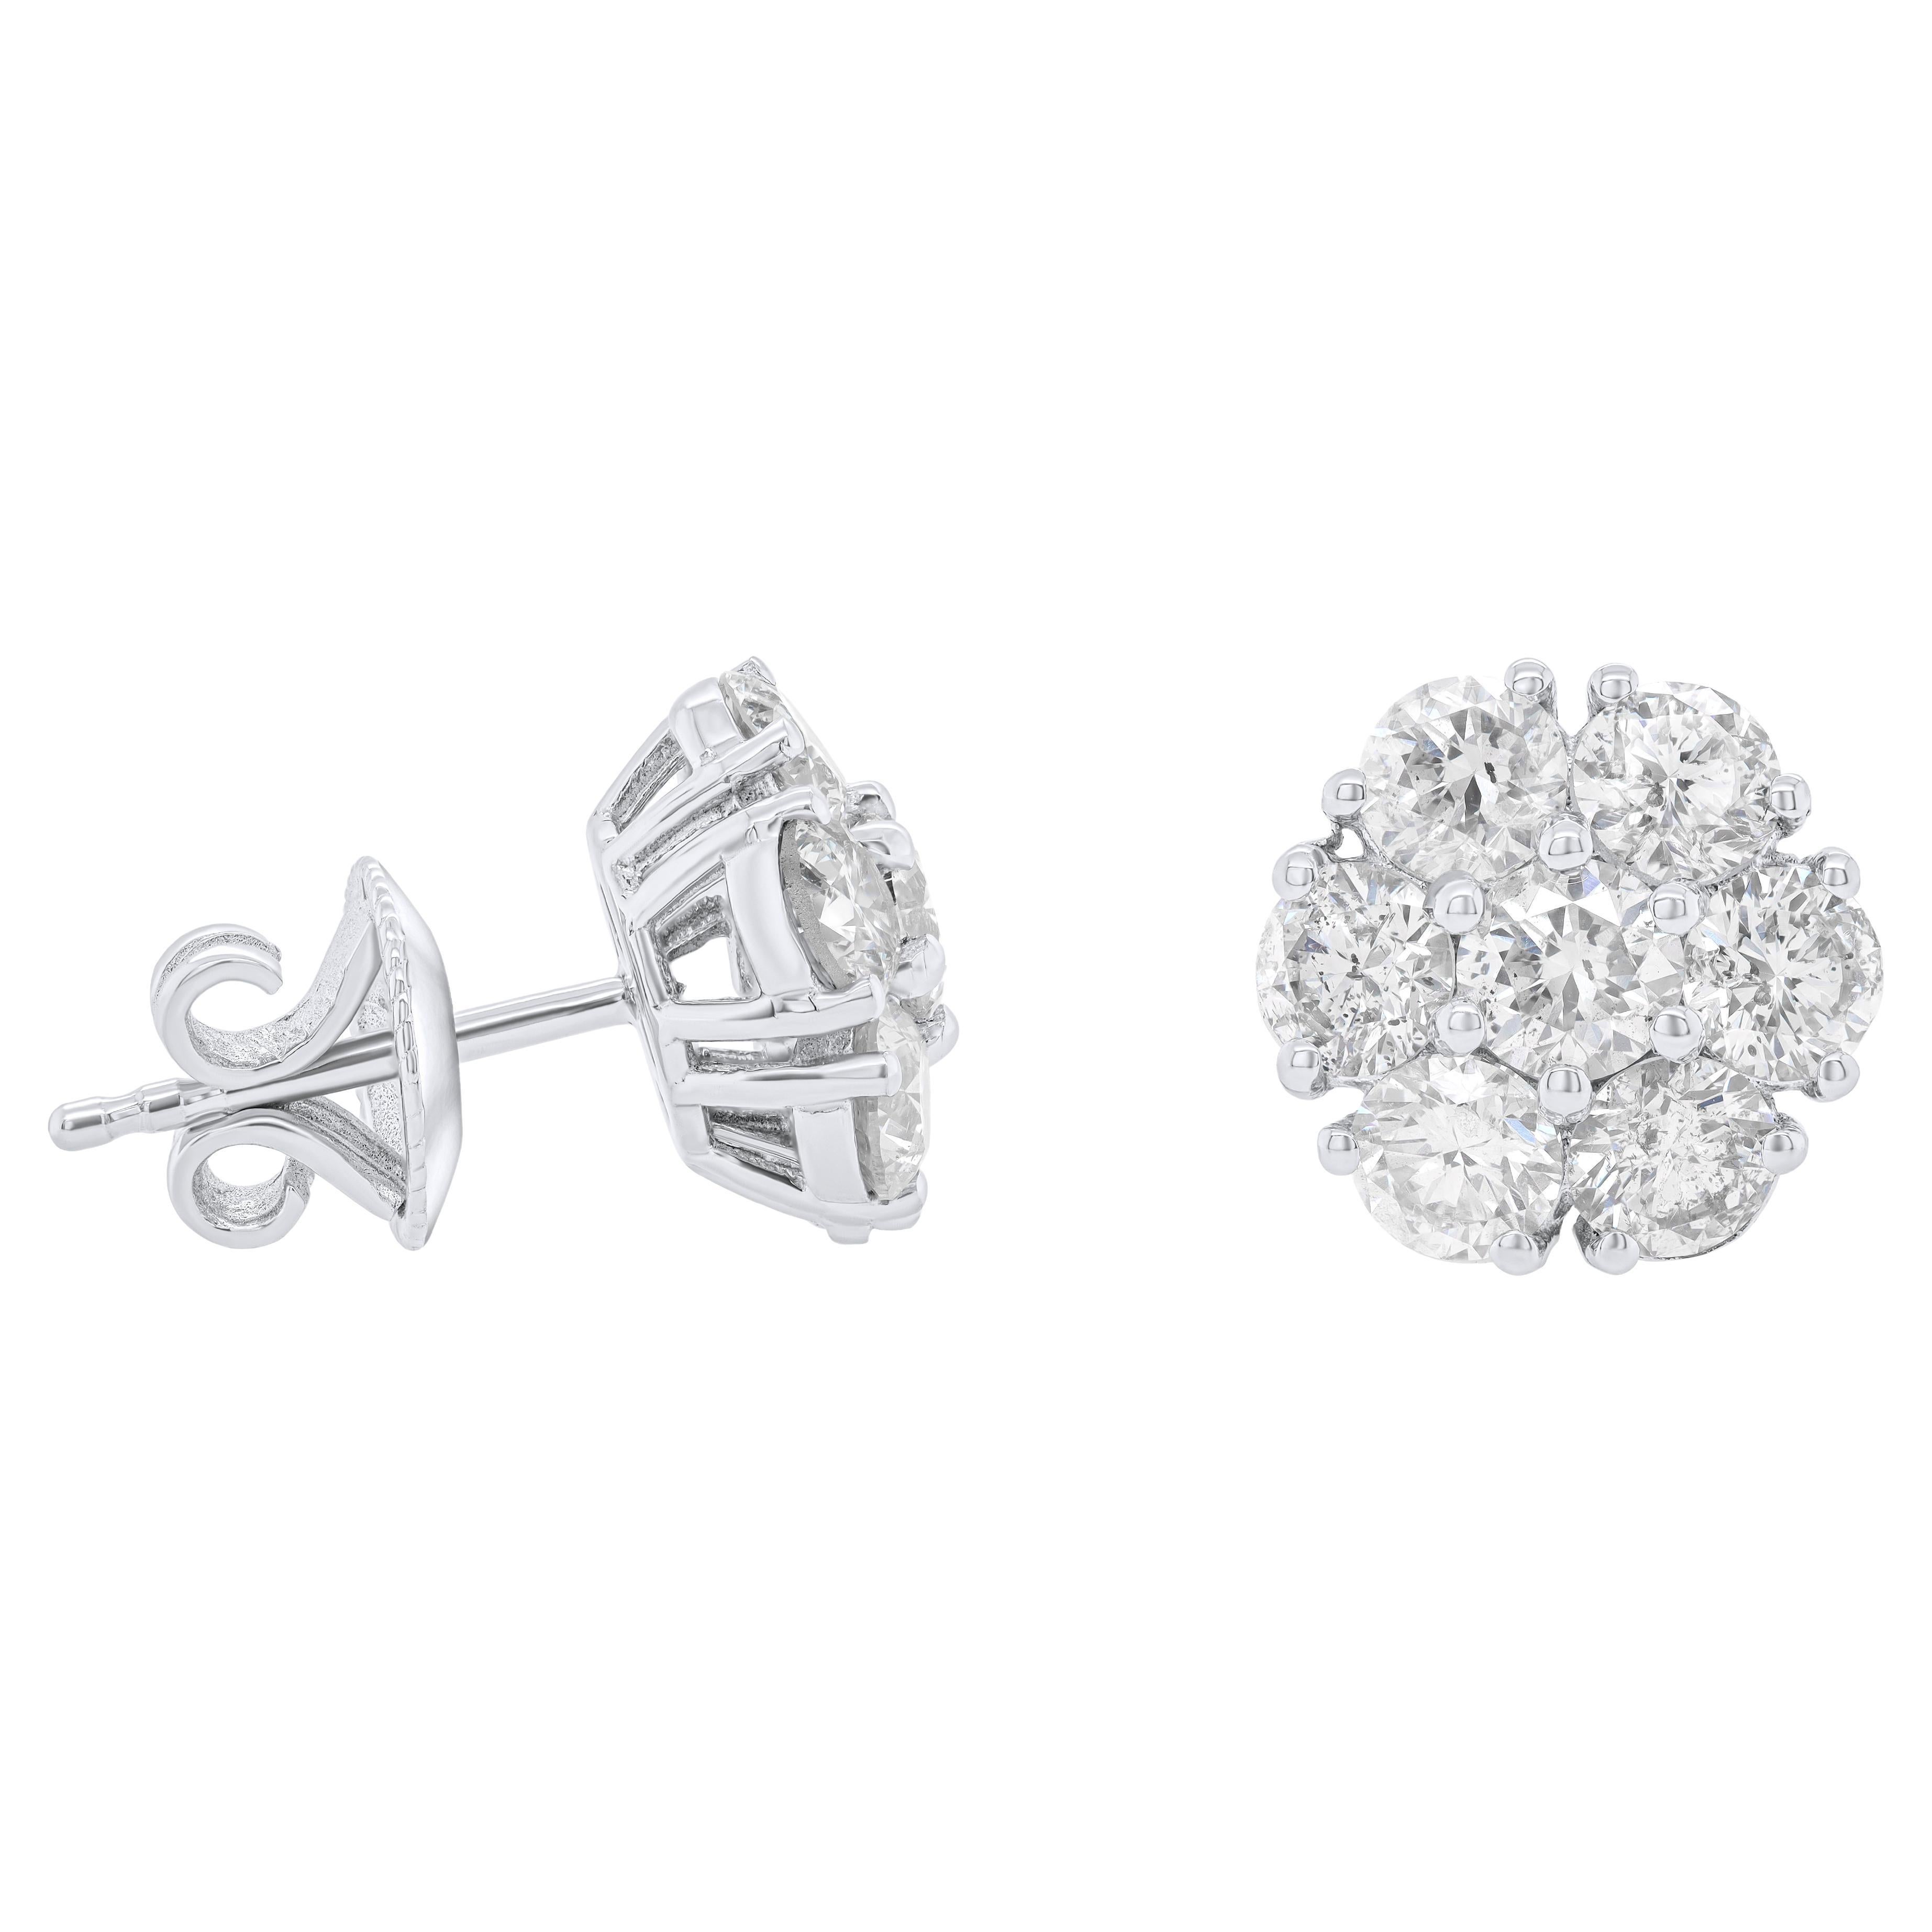 Diana M. 14 kt white gold stud earrings with a flower design 